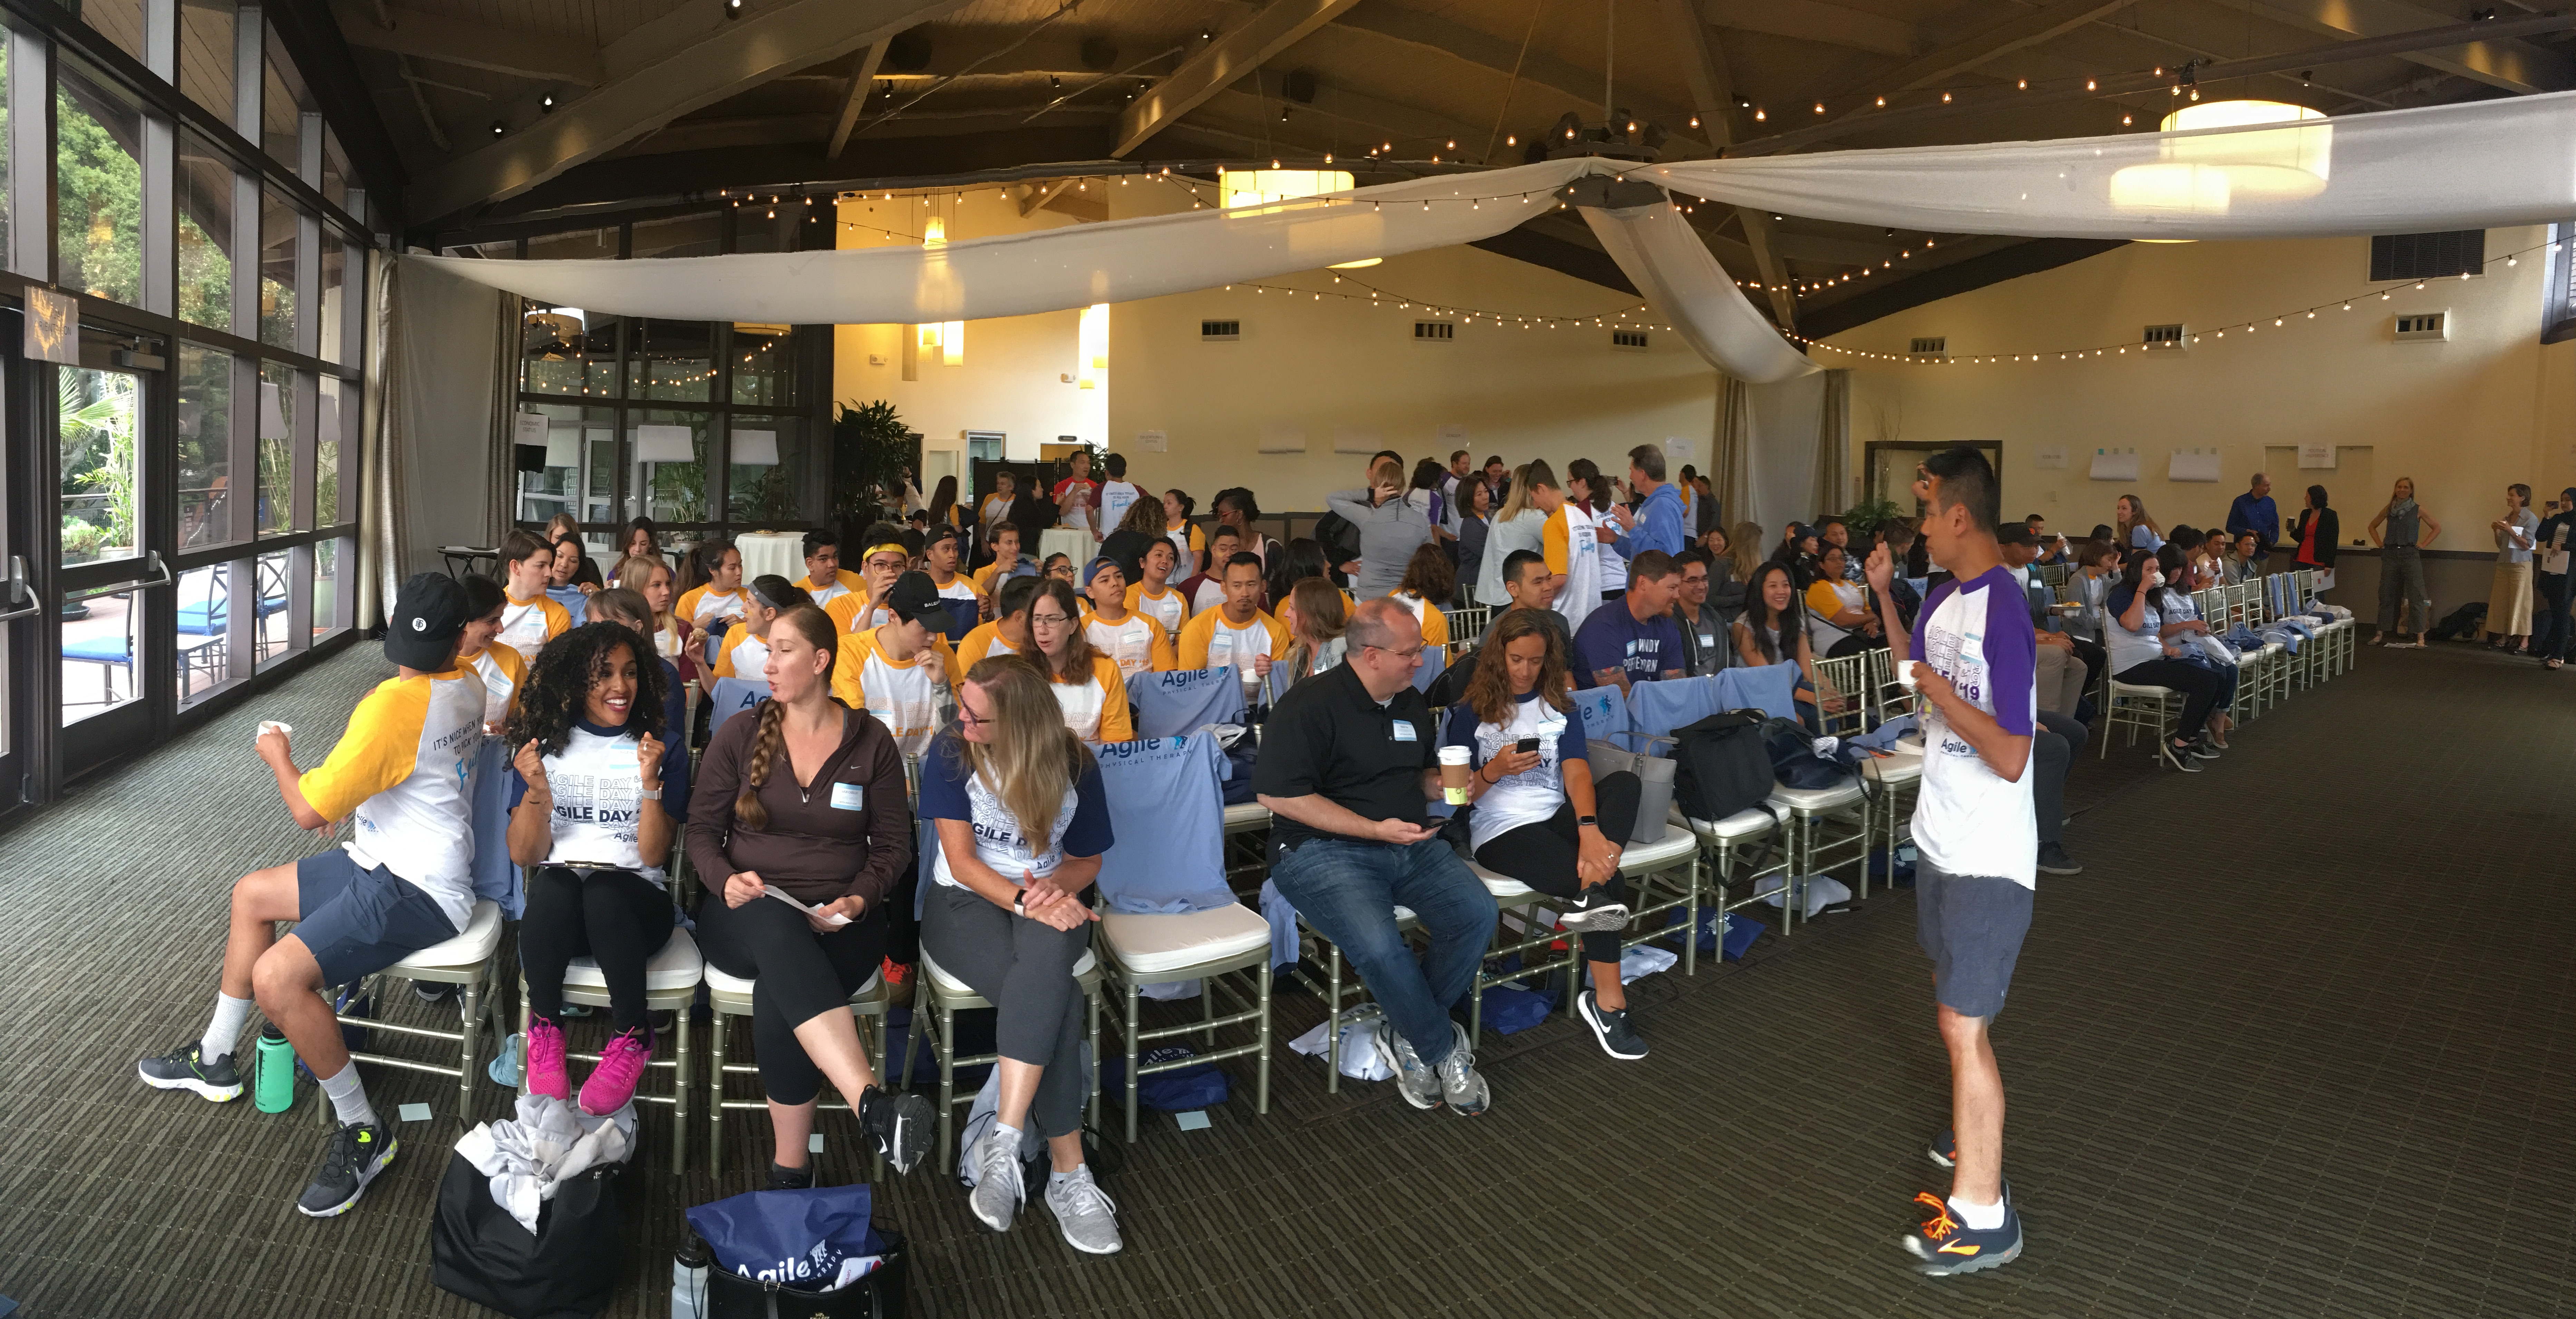 Employees gather at Agile Physical Therapy's "Agile State of the Company" event. Select employees were recognized with custom-branded Apple AirPods for their dedication to the company. Photo credit: Agility Physical Therapy